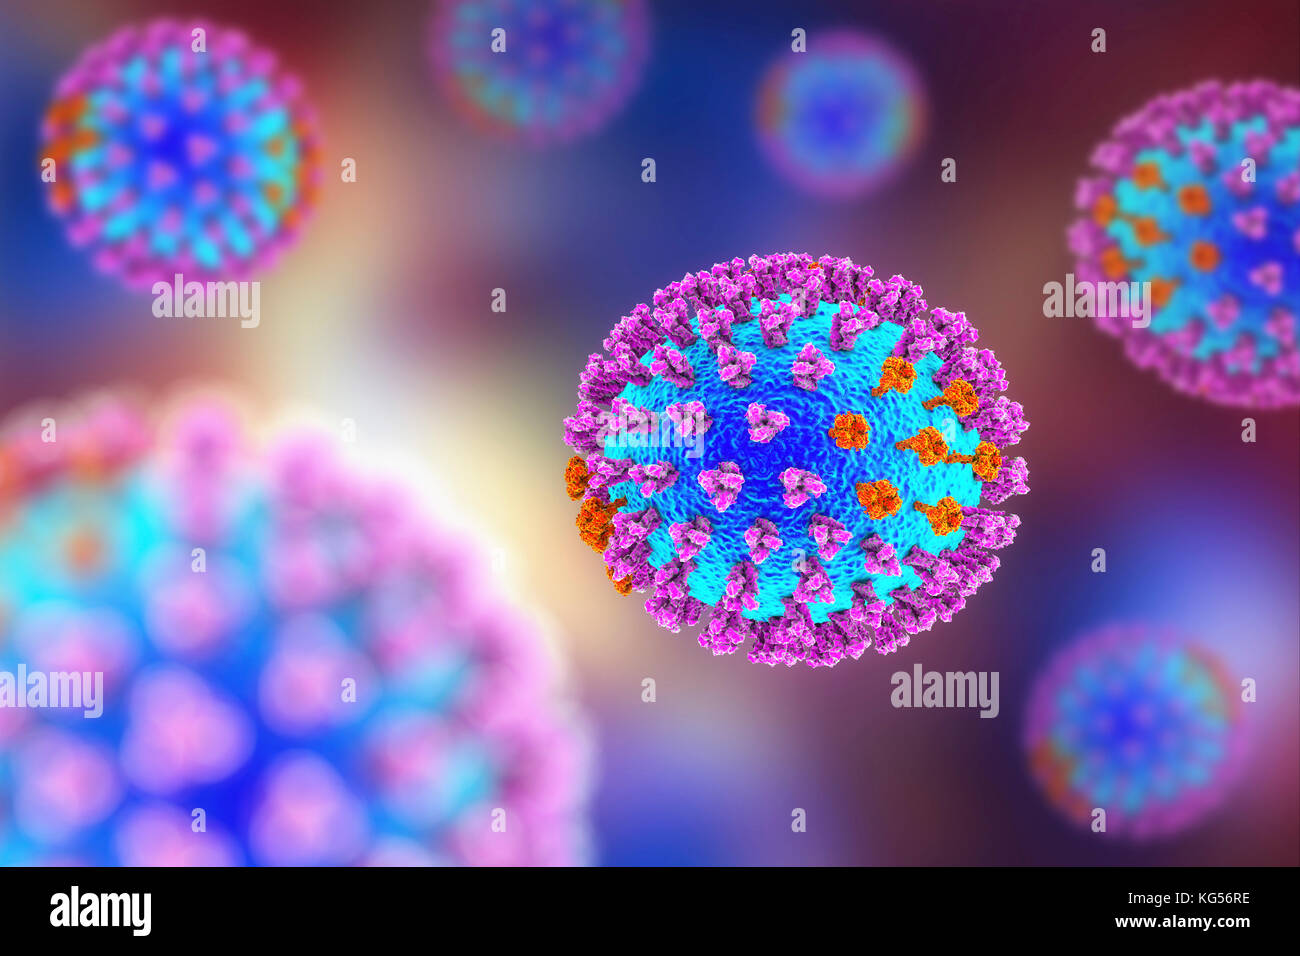 Flu viruses, computer illustration. Each virus consists of a core of RNA (ribonucleic acid) genetic material surrounded by a protein coat (blue). Embedded in the coat are surface proteins (spikes). There are two types of surface protein, hemagglutinin (purple) and neuraminidase (orange), and each exists in several subtypes. Both surface proteins are associated with the pathogenicity of a virus. Hemagglutinin binds to host cells, allowing the virus to enter them and replicate. Neuraminidase allows the new particles to exit the host after replication. Stock Photo